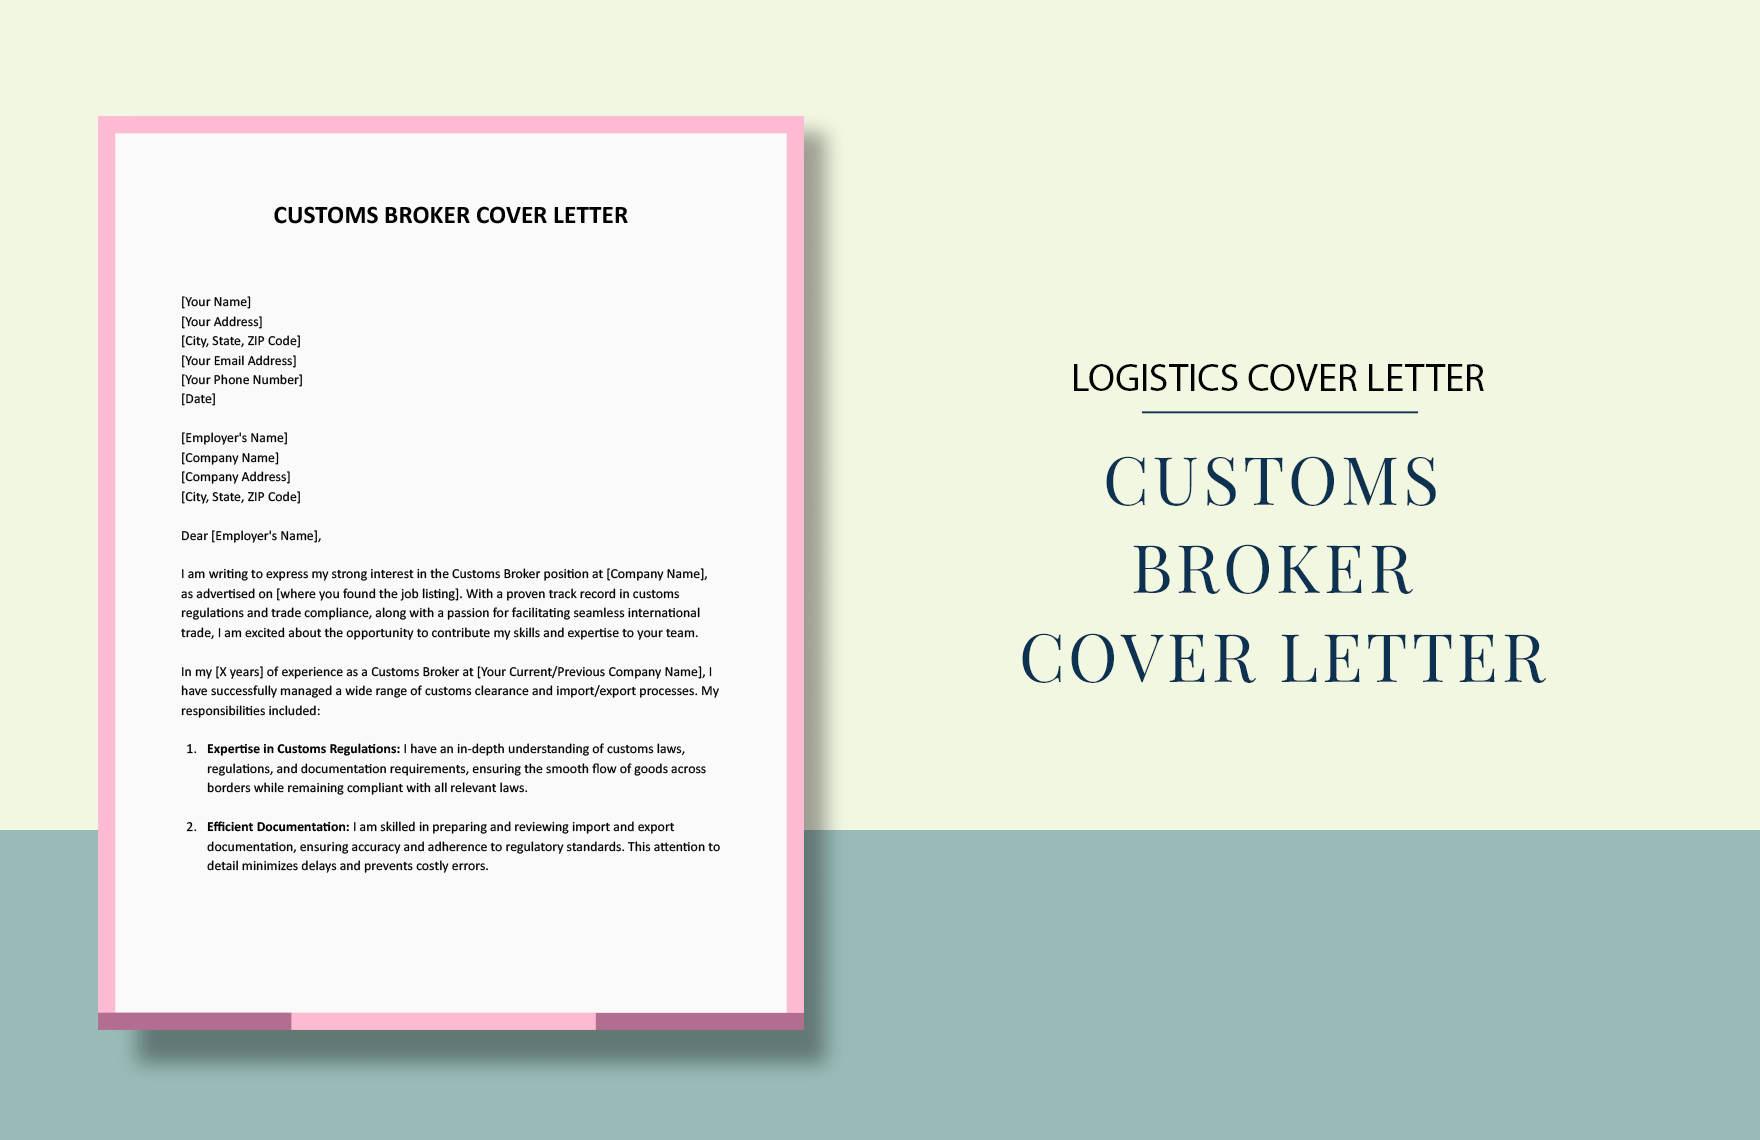 Customs Broker Cover Letter in Word, Google Docs, Apple Pages